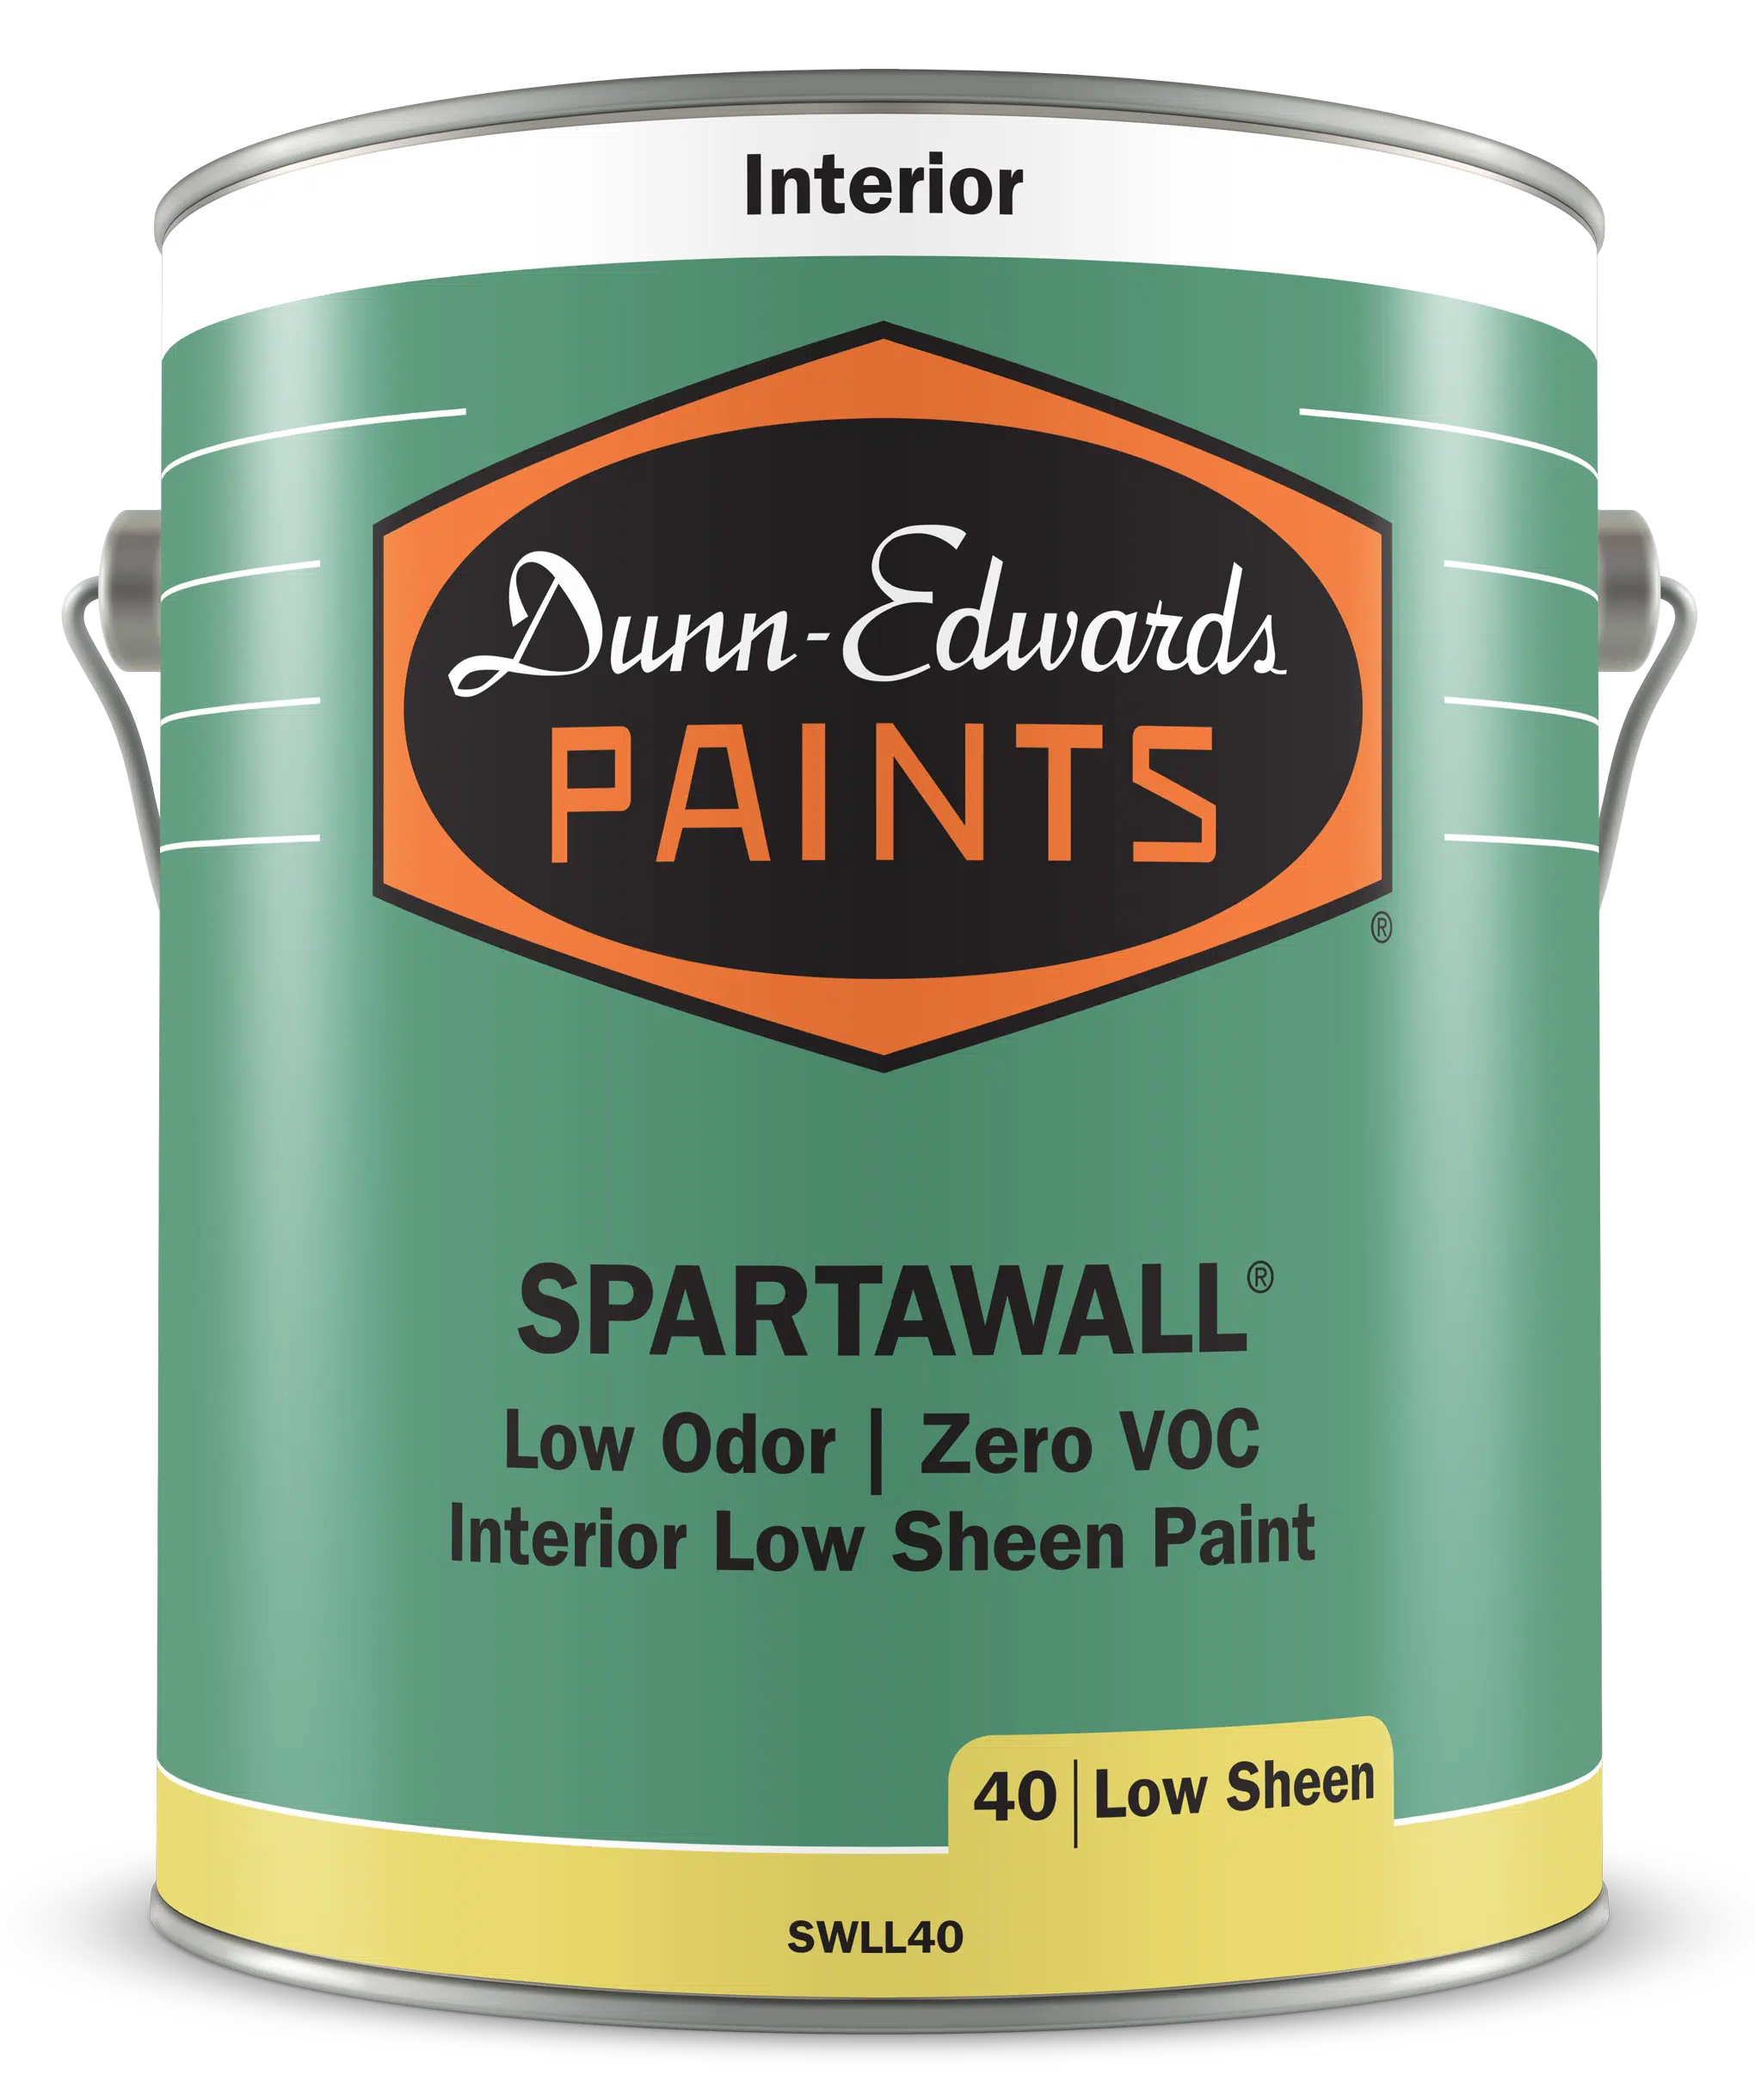 SPARTAWALL Interior Low Sheen Paint Can